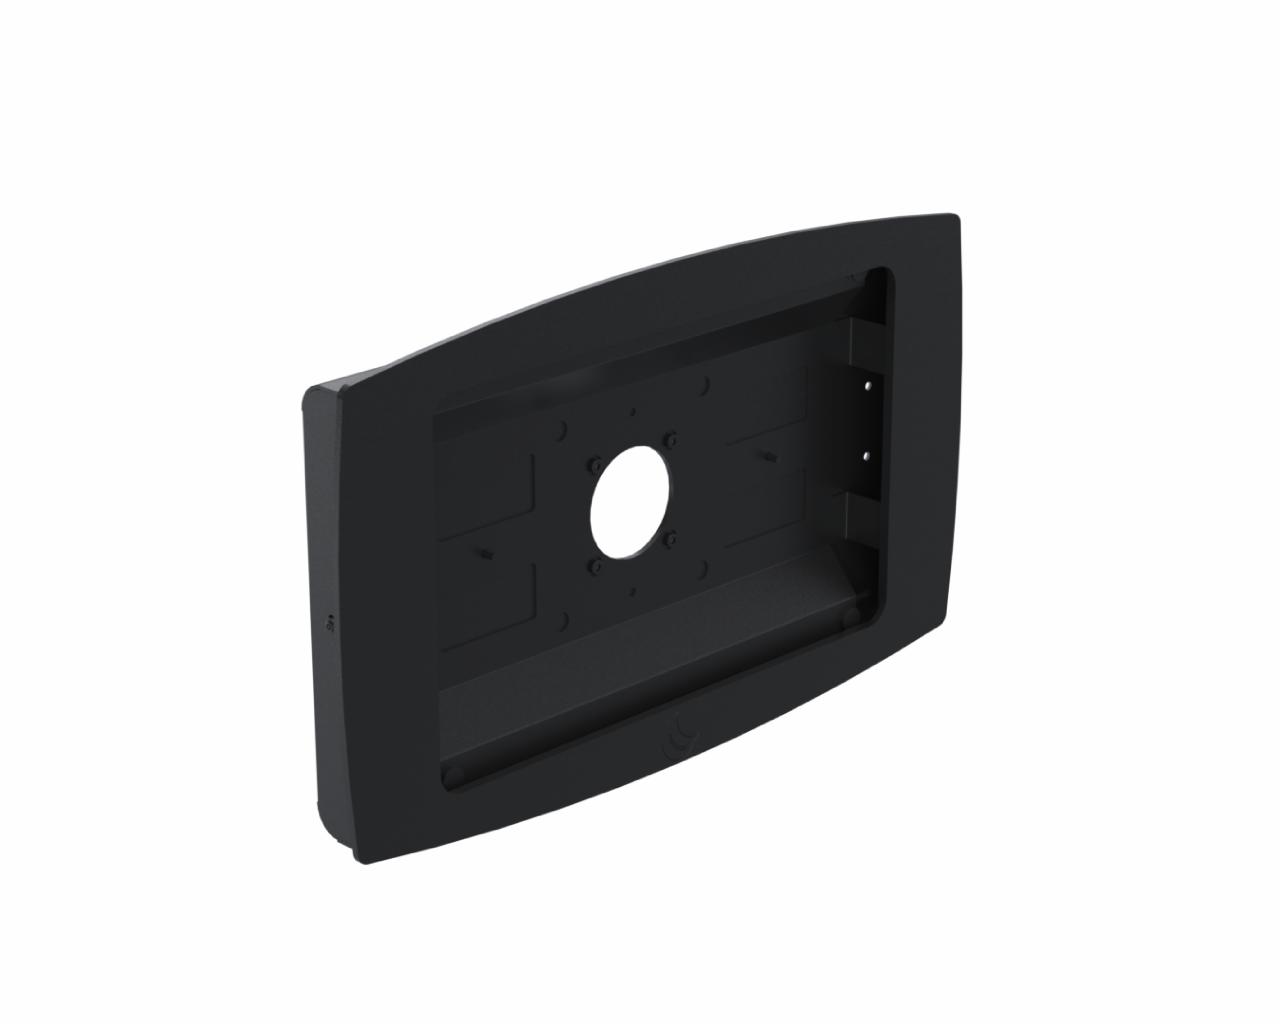 A-Frame for Samsung Galaxy Tab S5e (S6) 10.5 (2019) - Security Screw